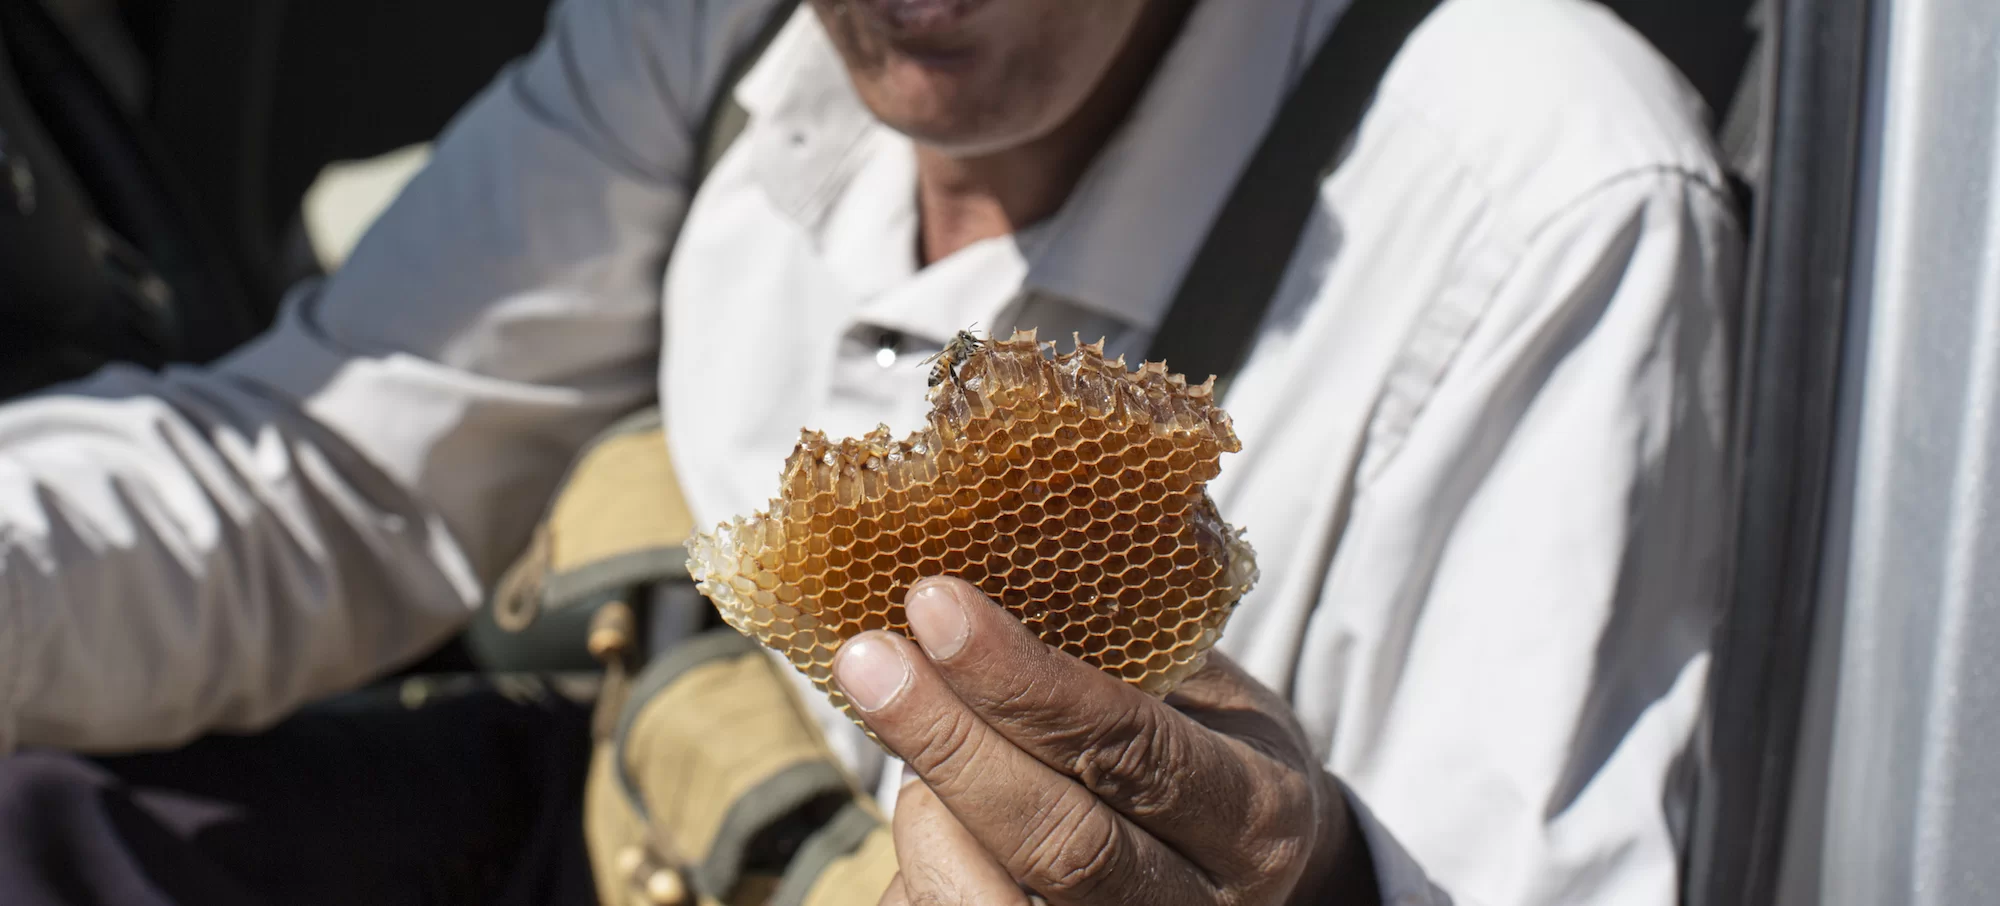 An Ancient Tradition at Risk: Yemen’s Beekeeping and Honey Production in Times of War